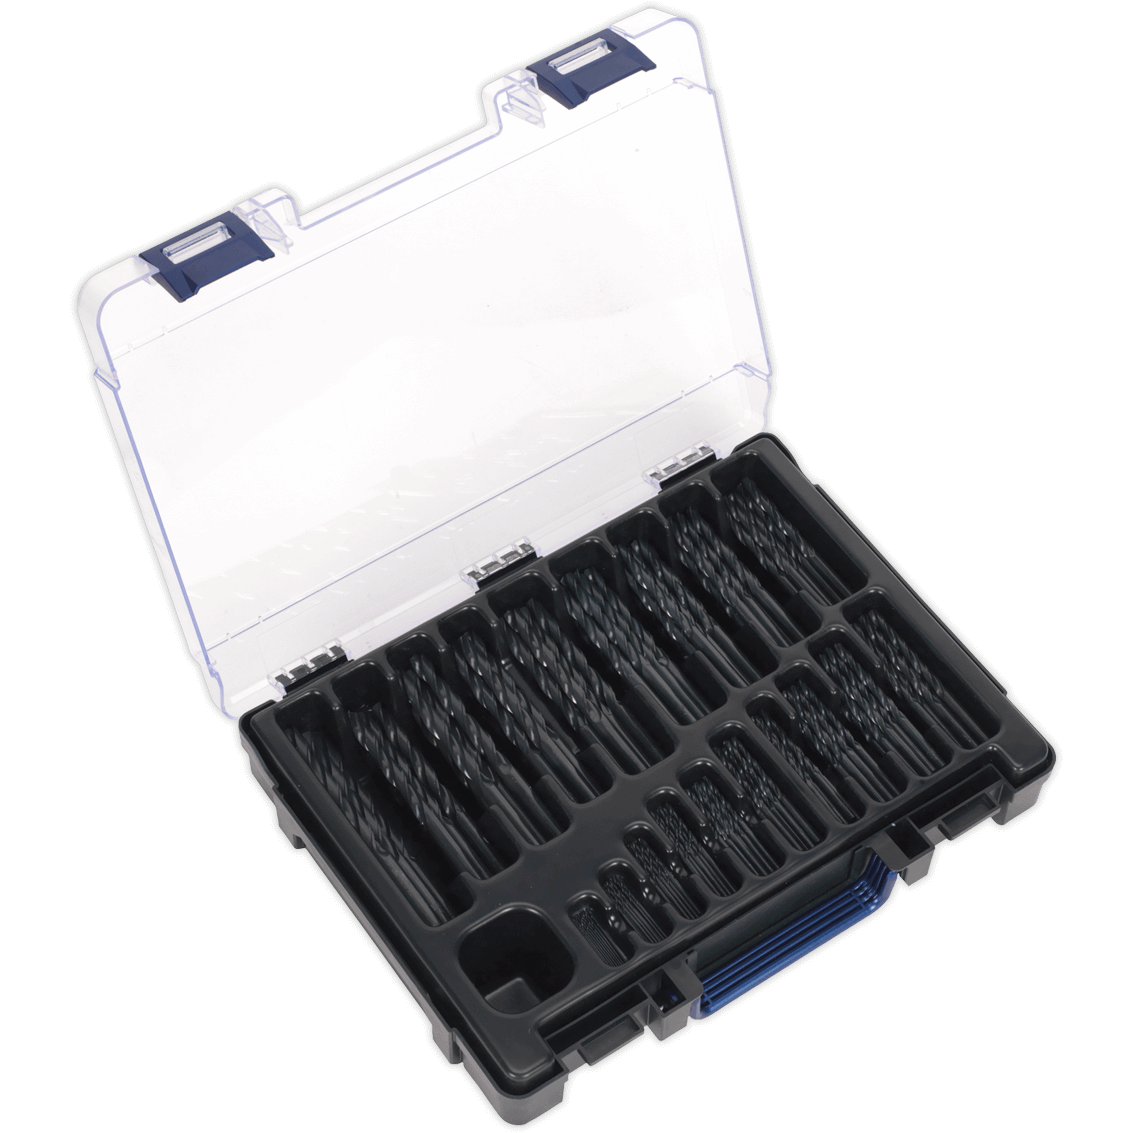 Sealey 170 Piece Assorted Hss Roll Forged Drill Bit Set